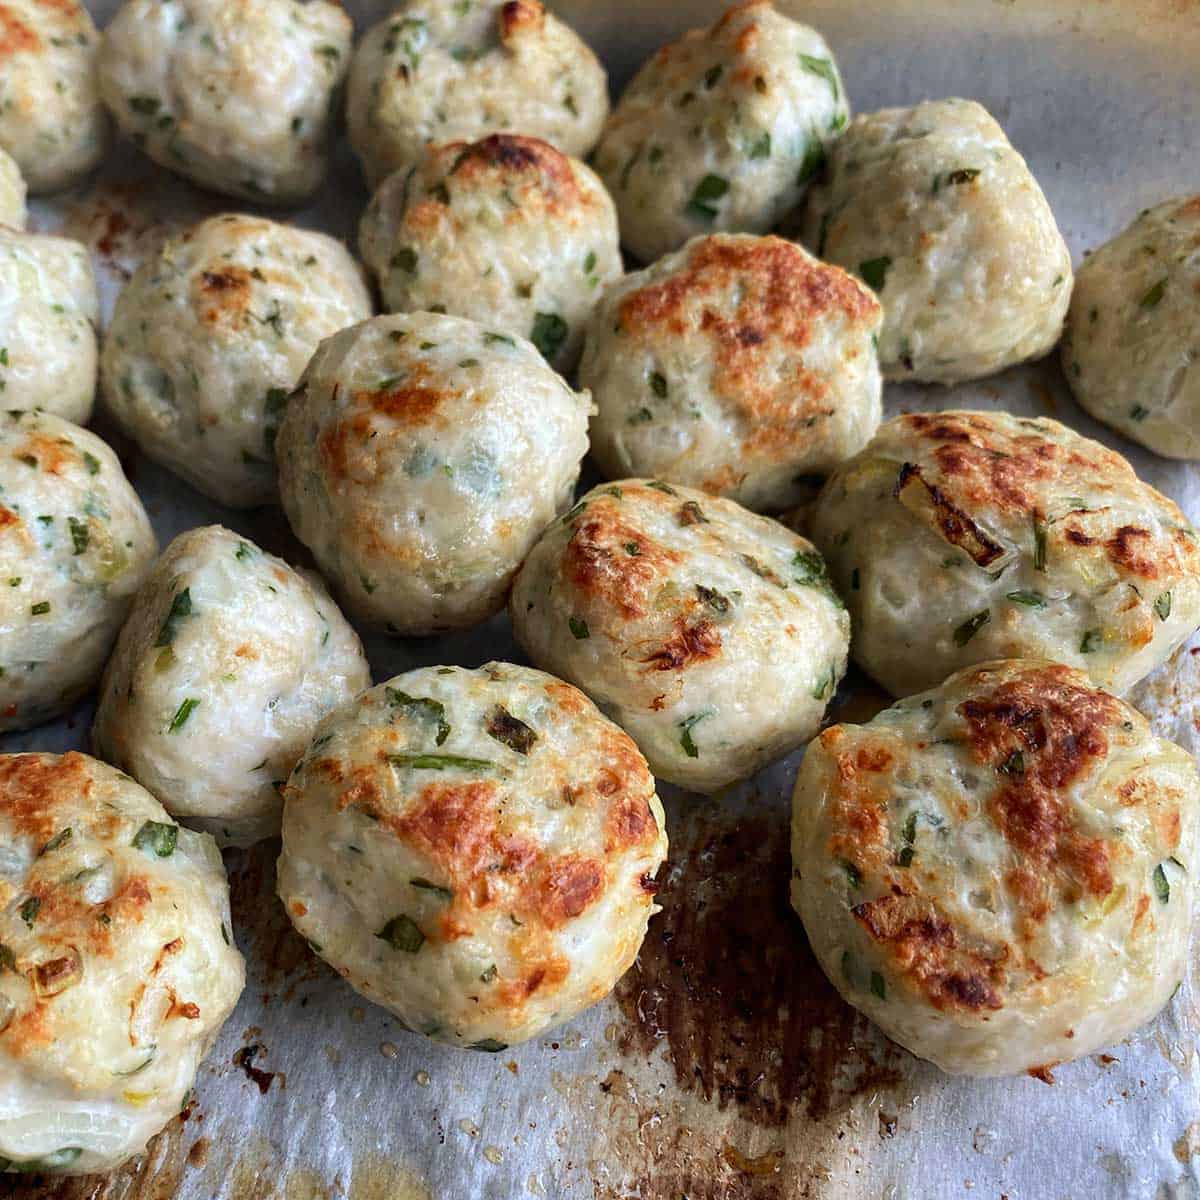 Grilled chicken meatballs on a baking tray